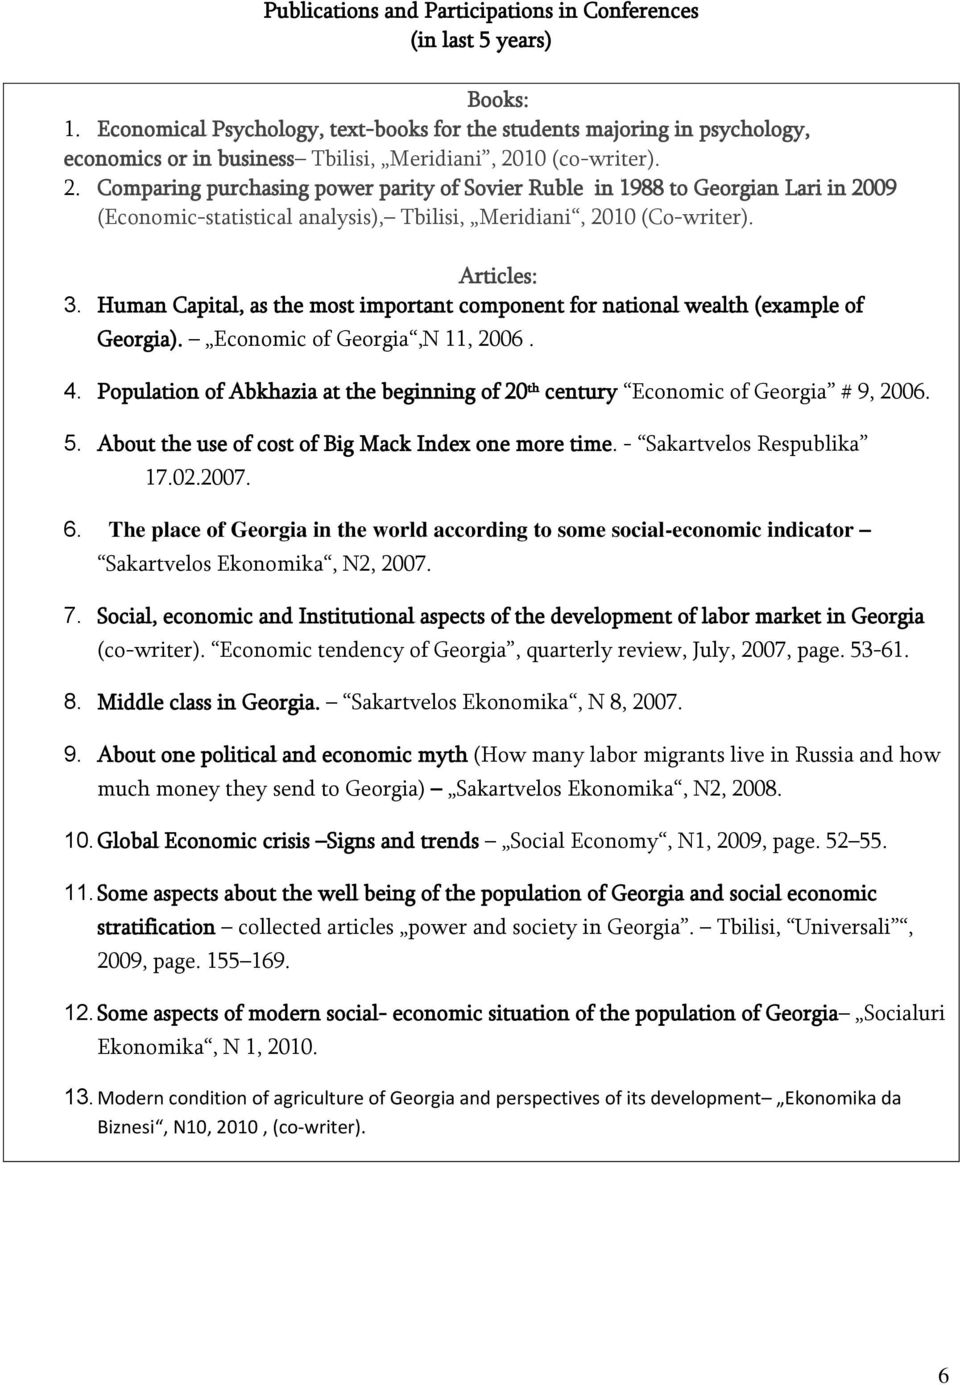 10 (co-writer). 2. Comparing purchasing power parity of Sovier Ruble in 1988 to Georgian Lari in 2009 (Economic-statistical analysis), Tbilisi, Meridiani, 2010 (Co-writer). Articles: 3.